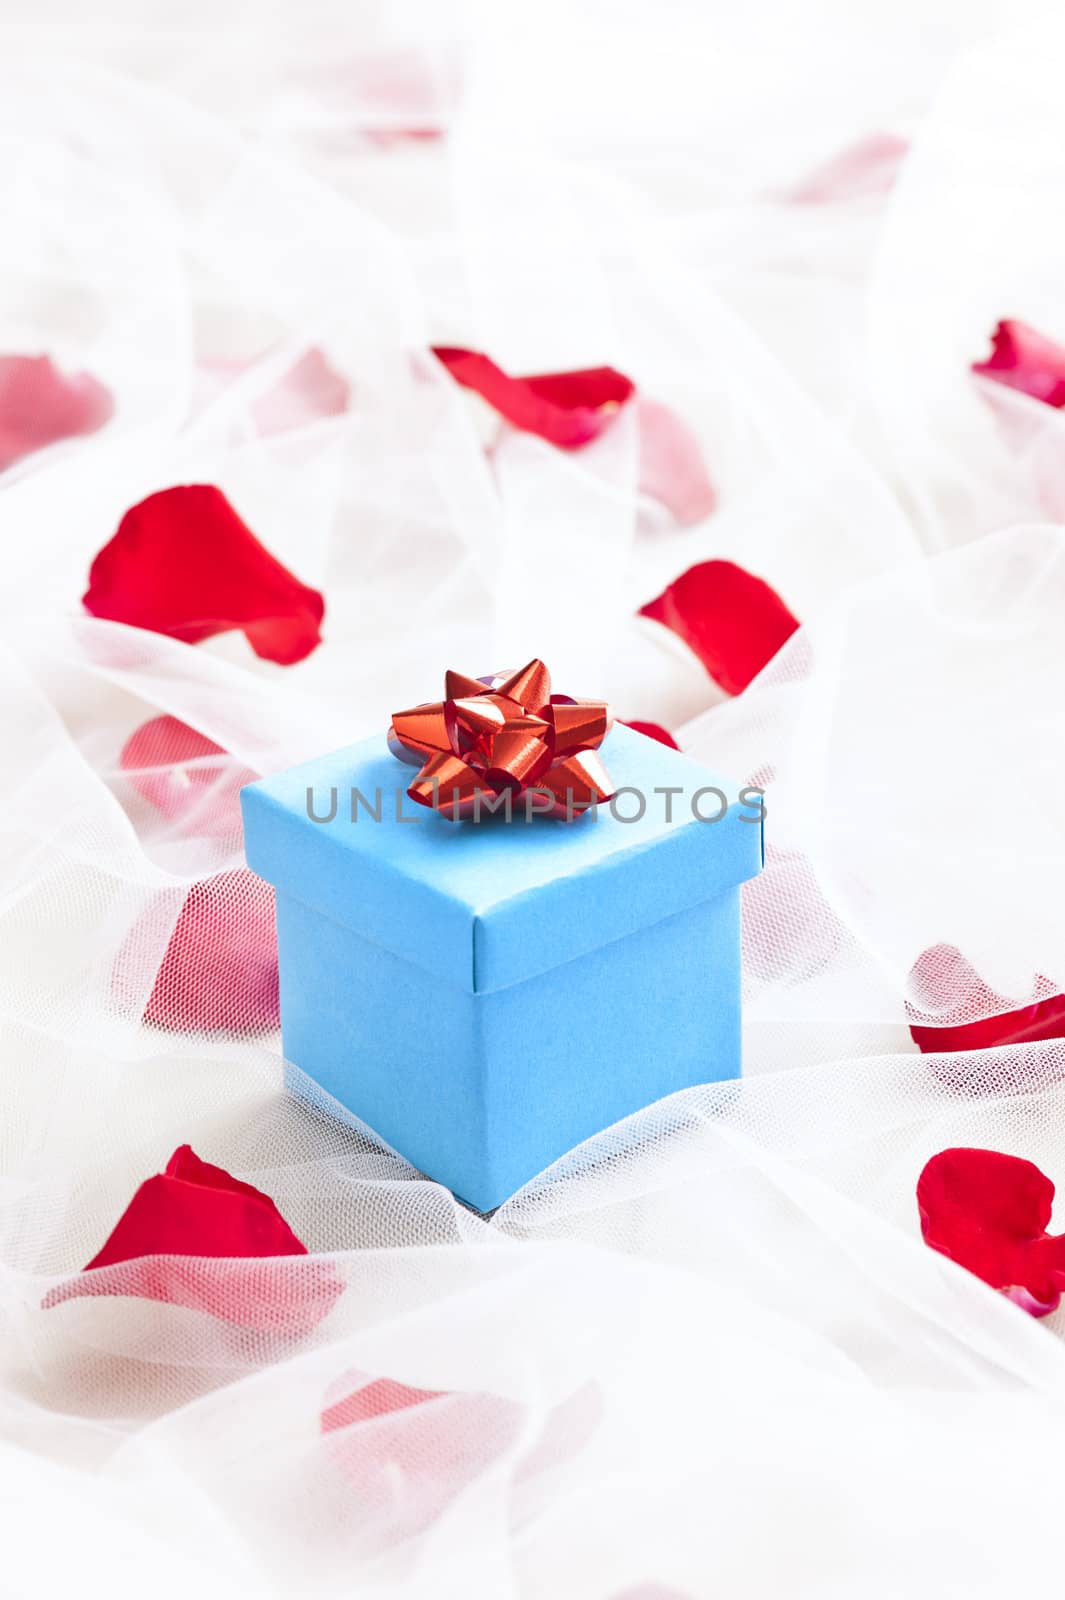 Blue Gift box with silver bow on wedding veil with rose petals